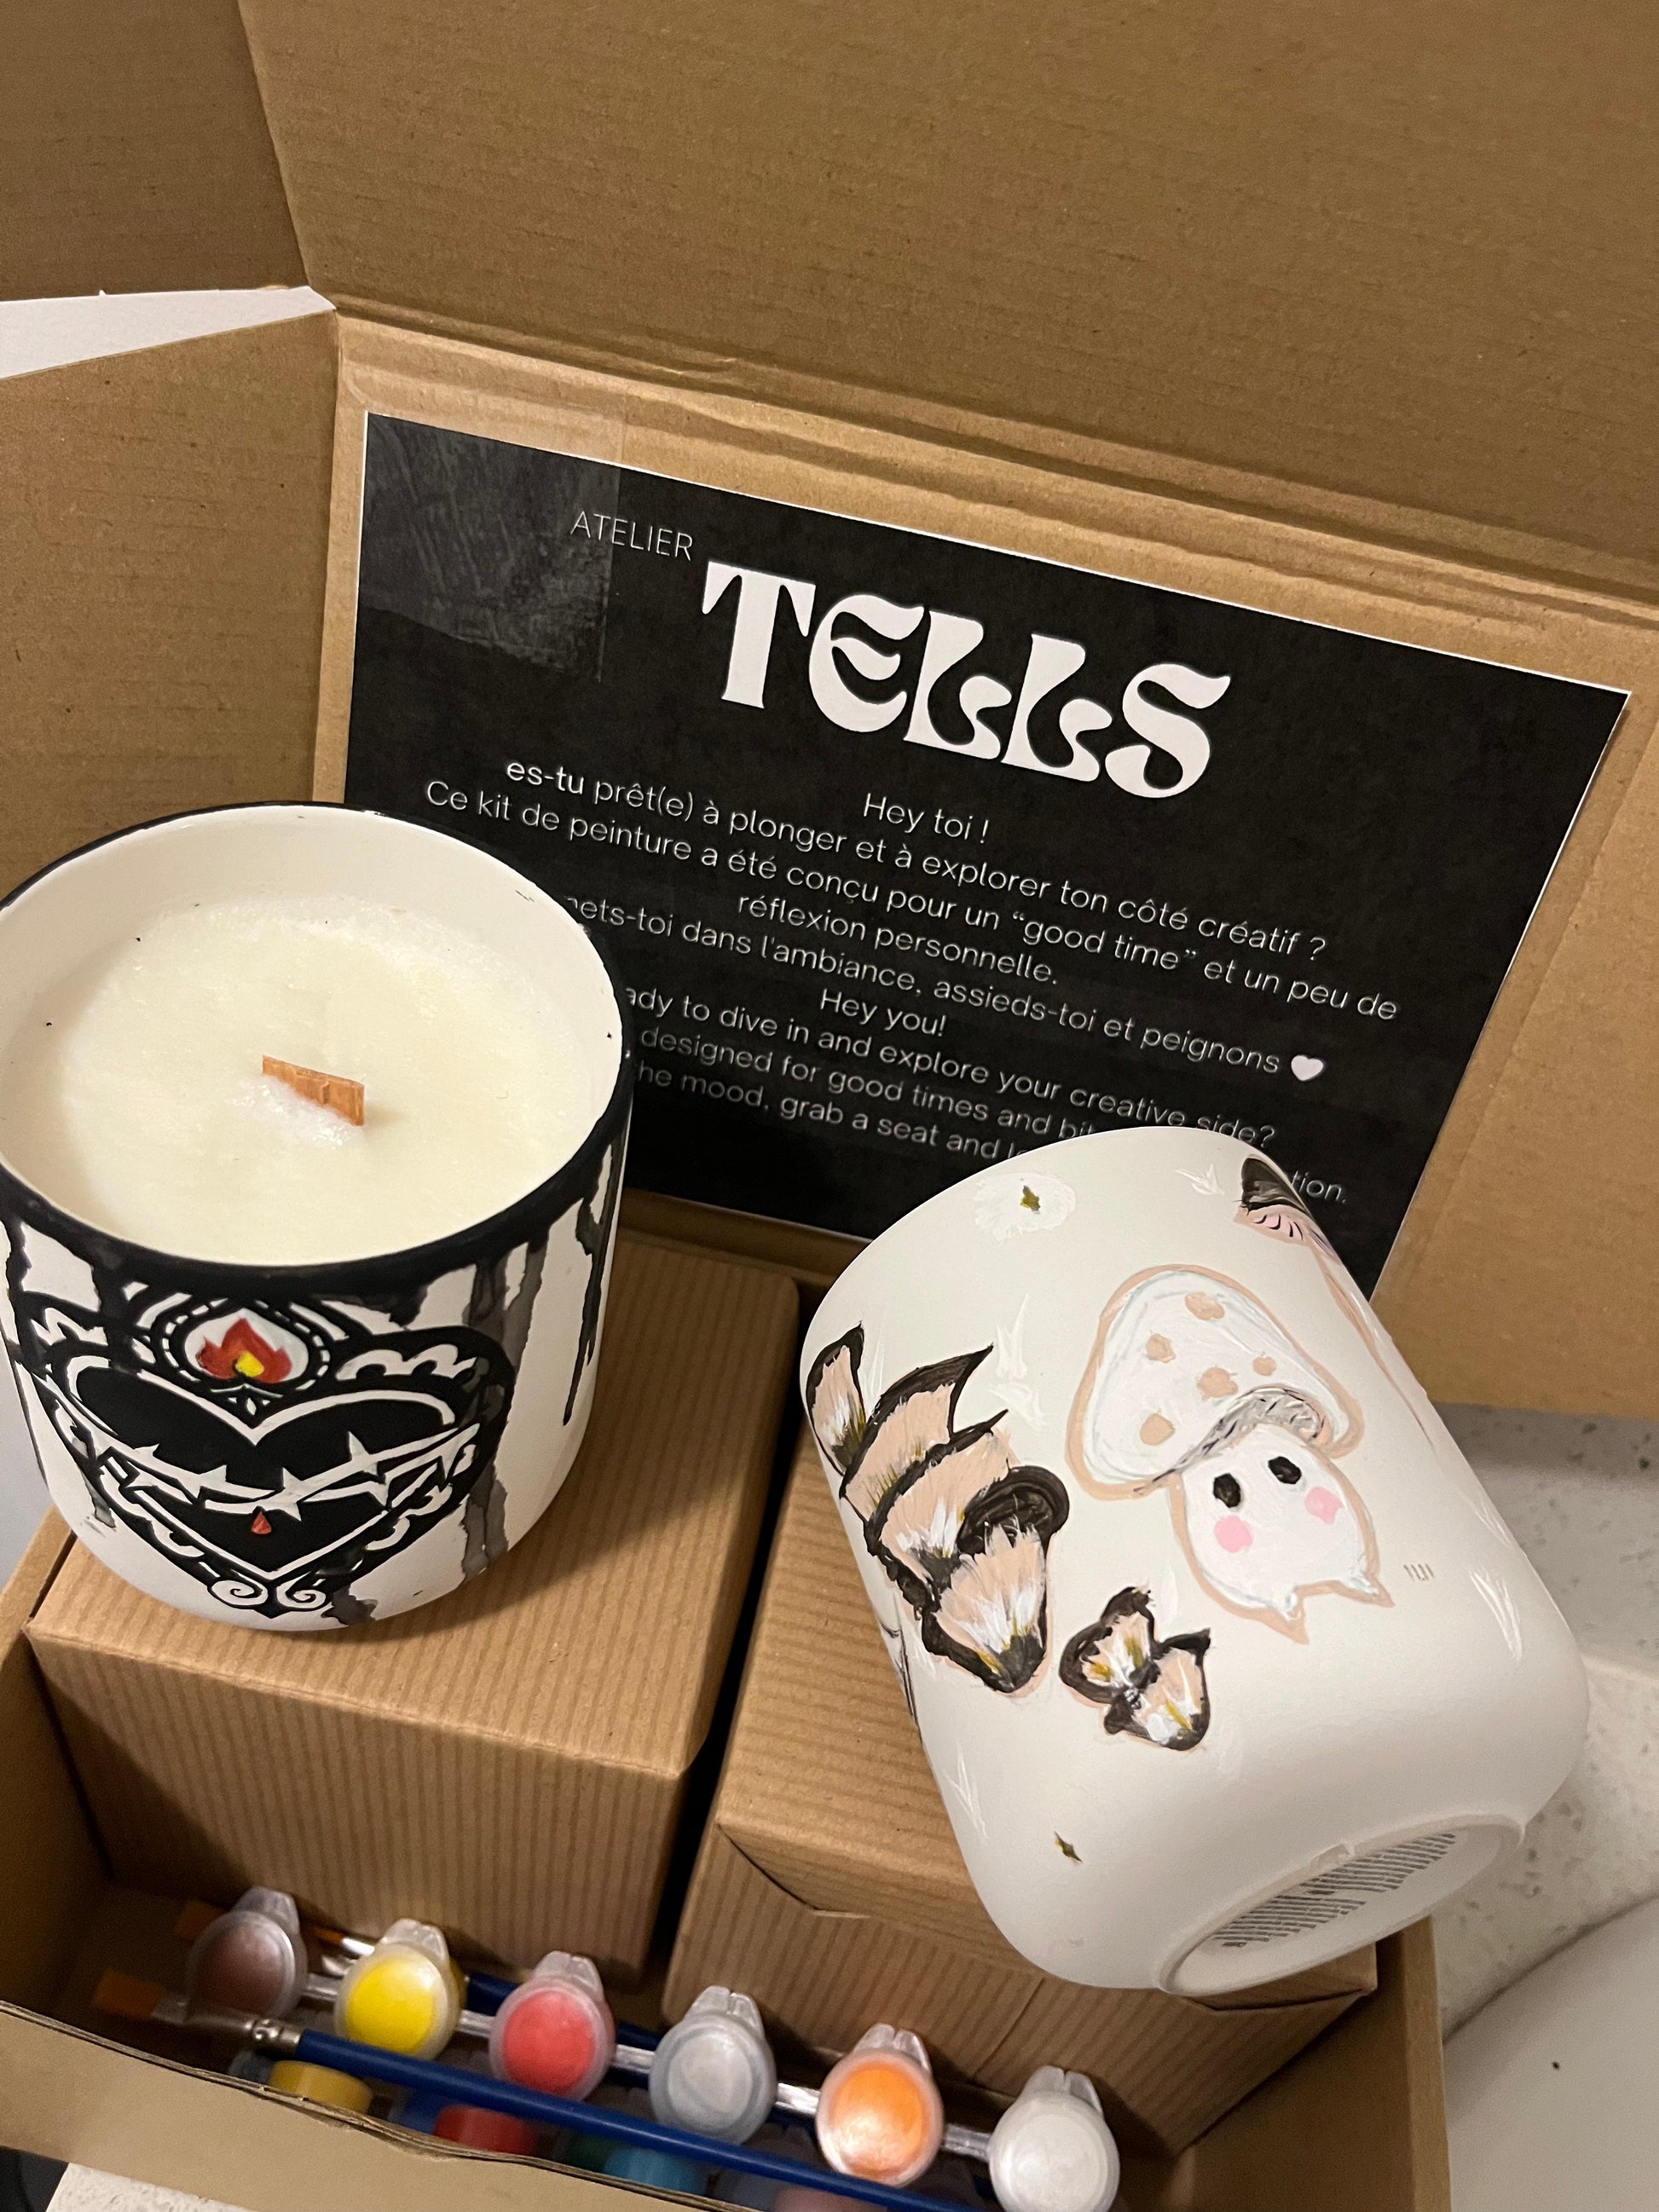 Wooden Wicks 101 – Noted Candles